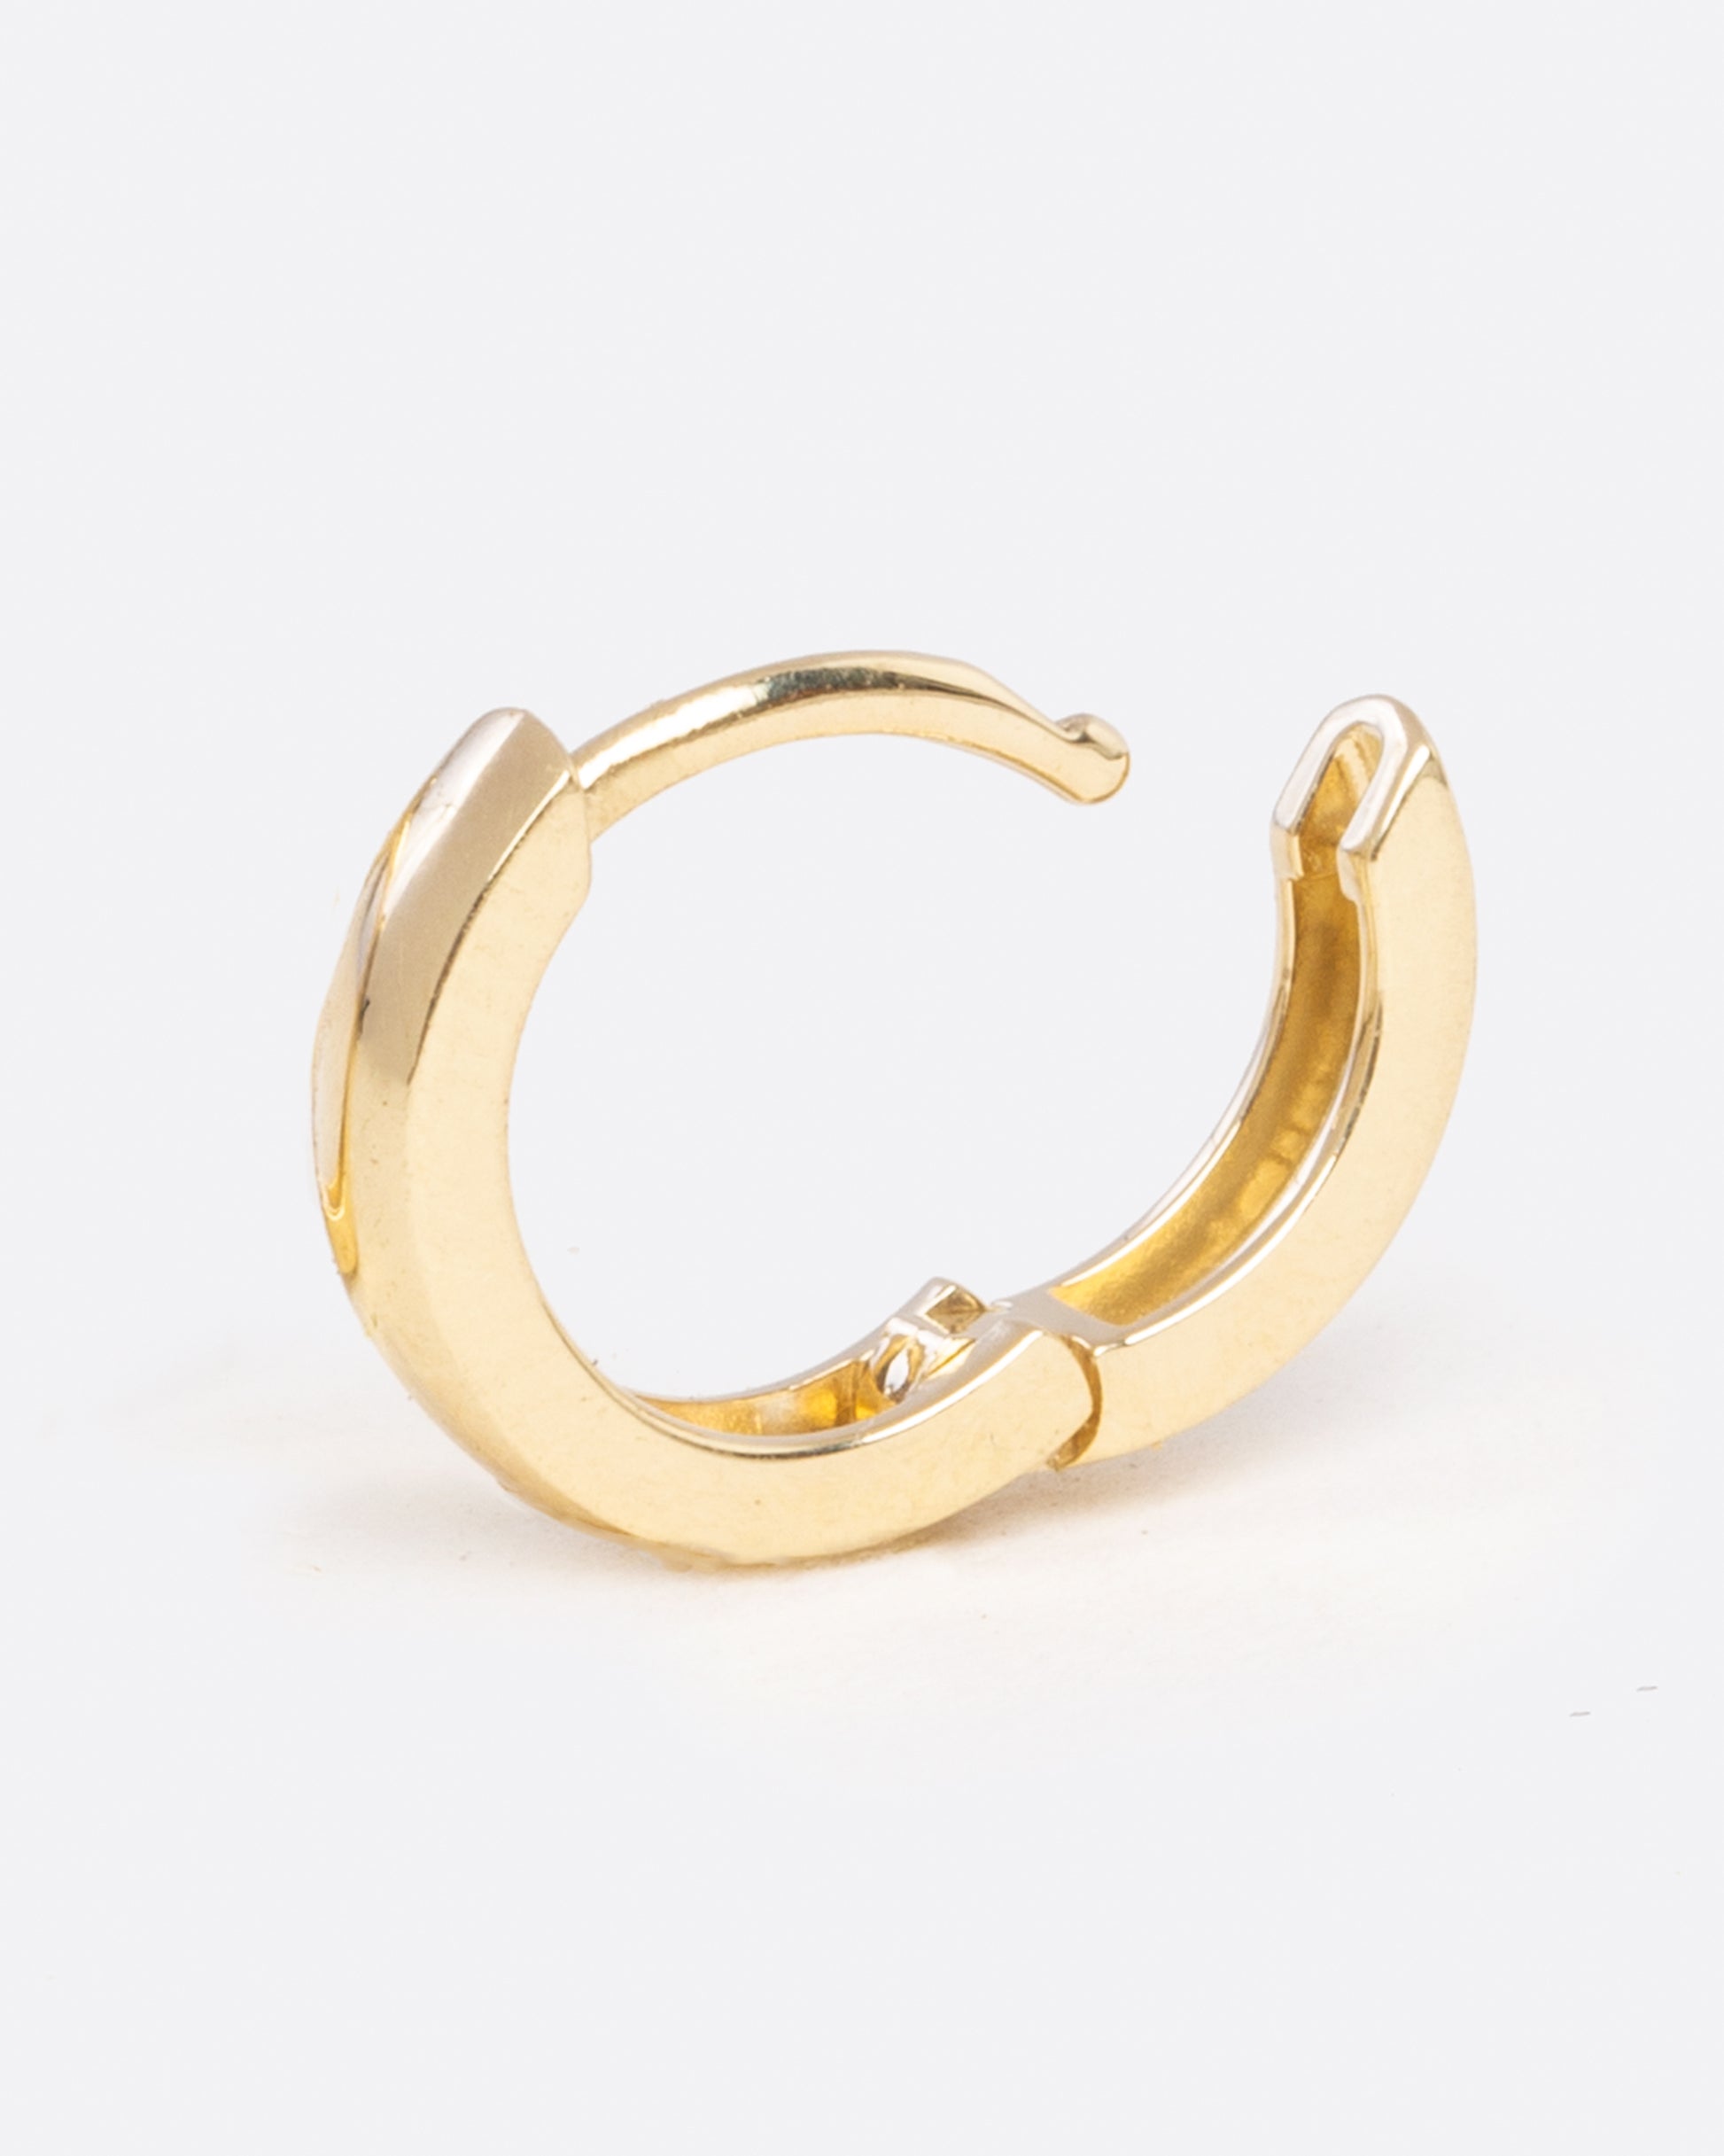 a tiny yellow gold hoop earring with a hinge in the middle, shown open